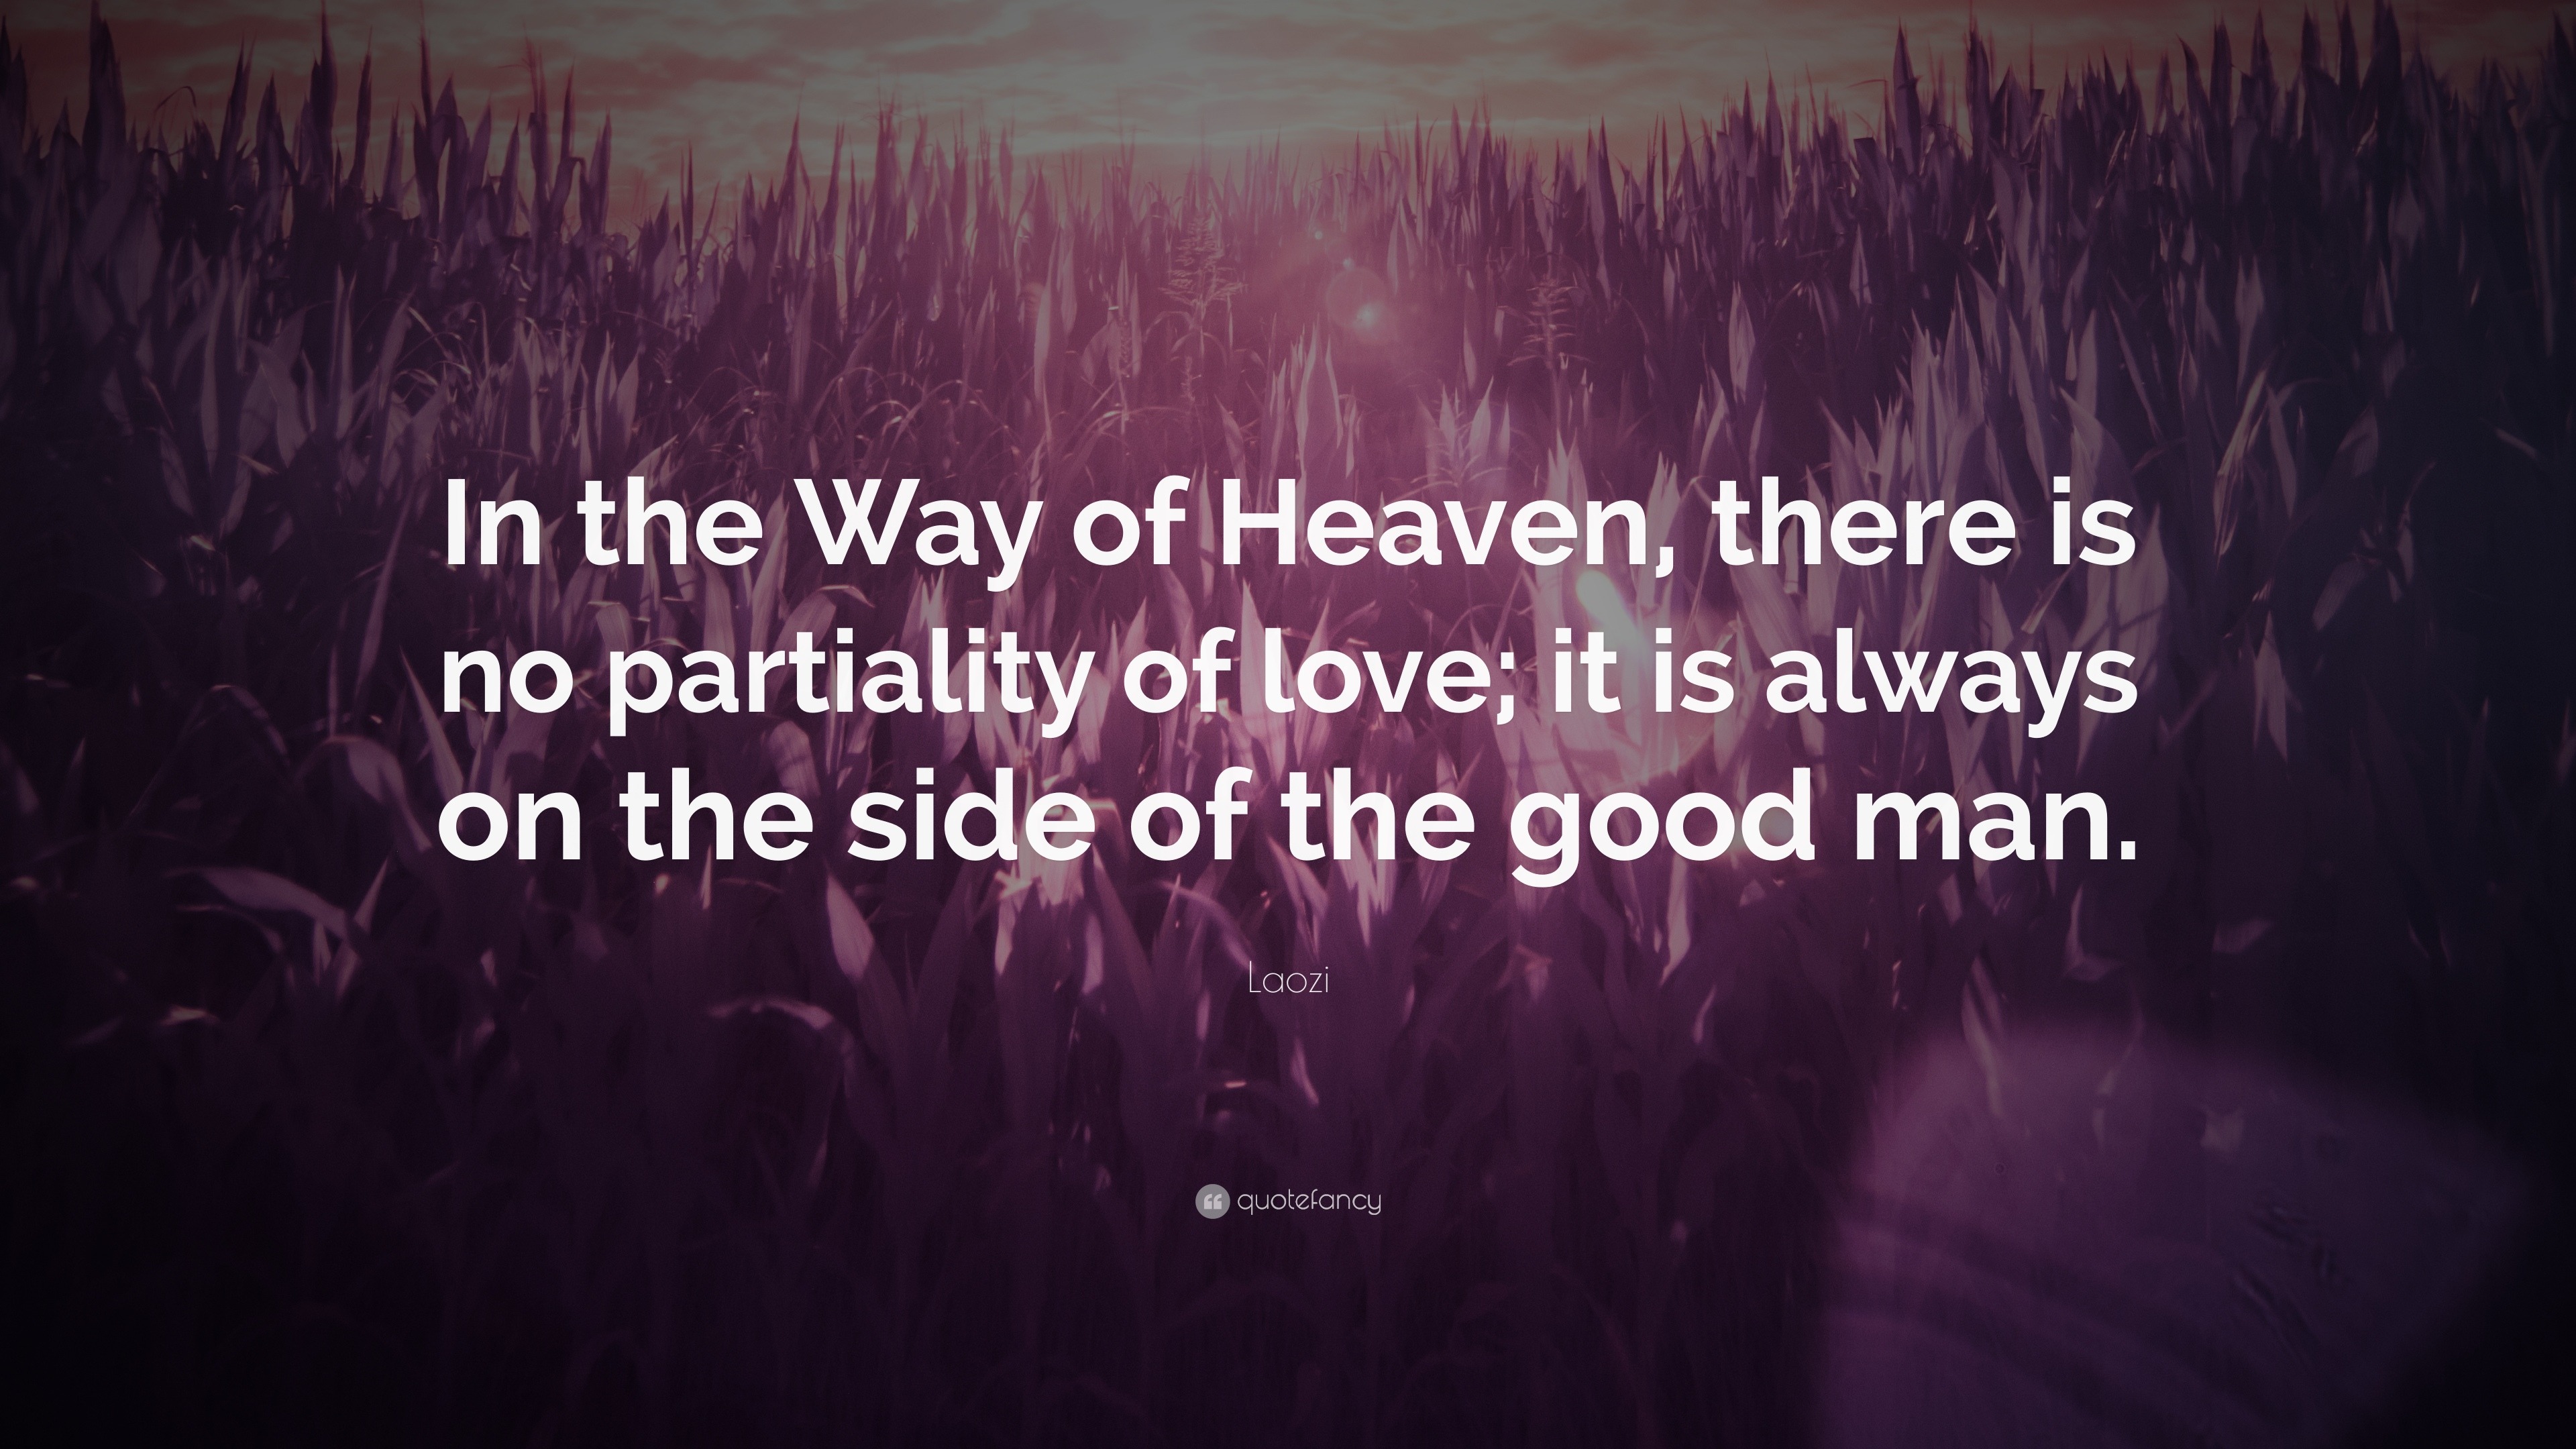 Laozi Quote “In the Way of Heaven there is no partiality of love